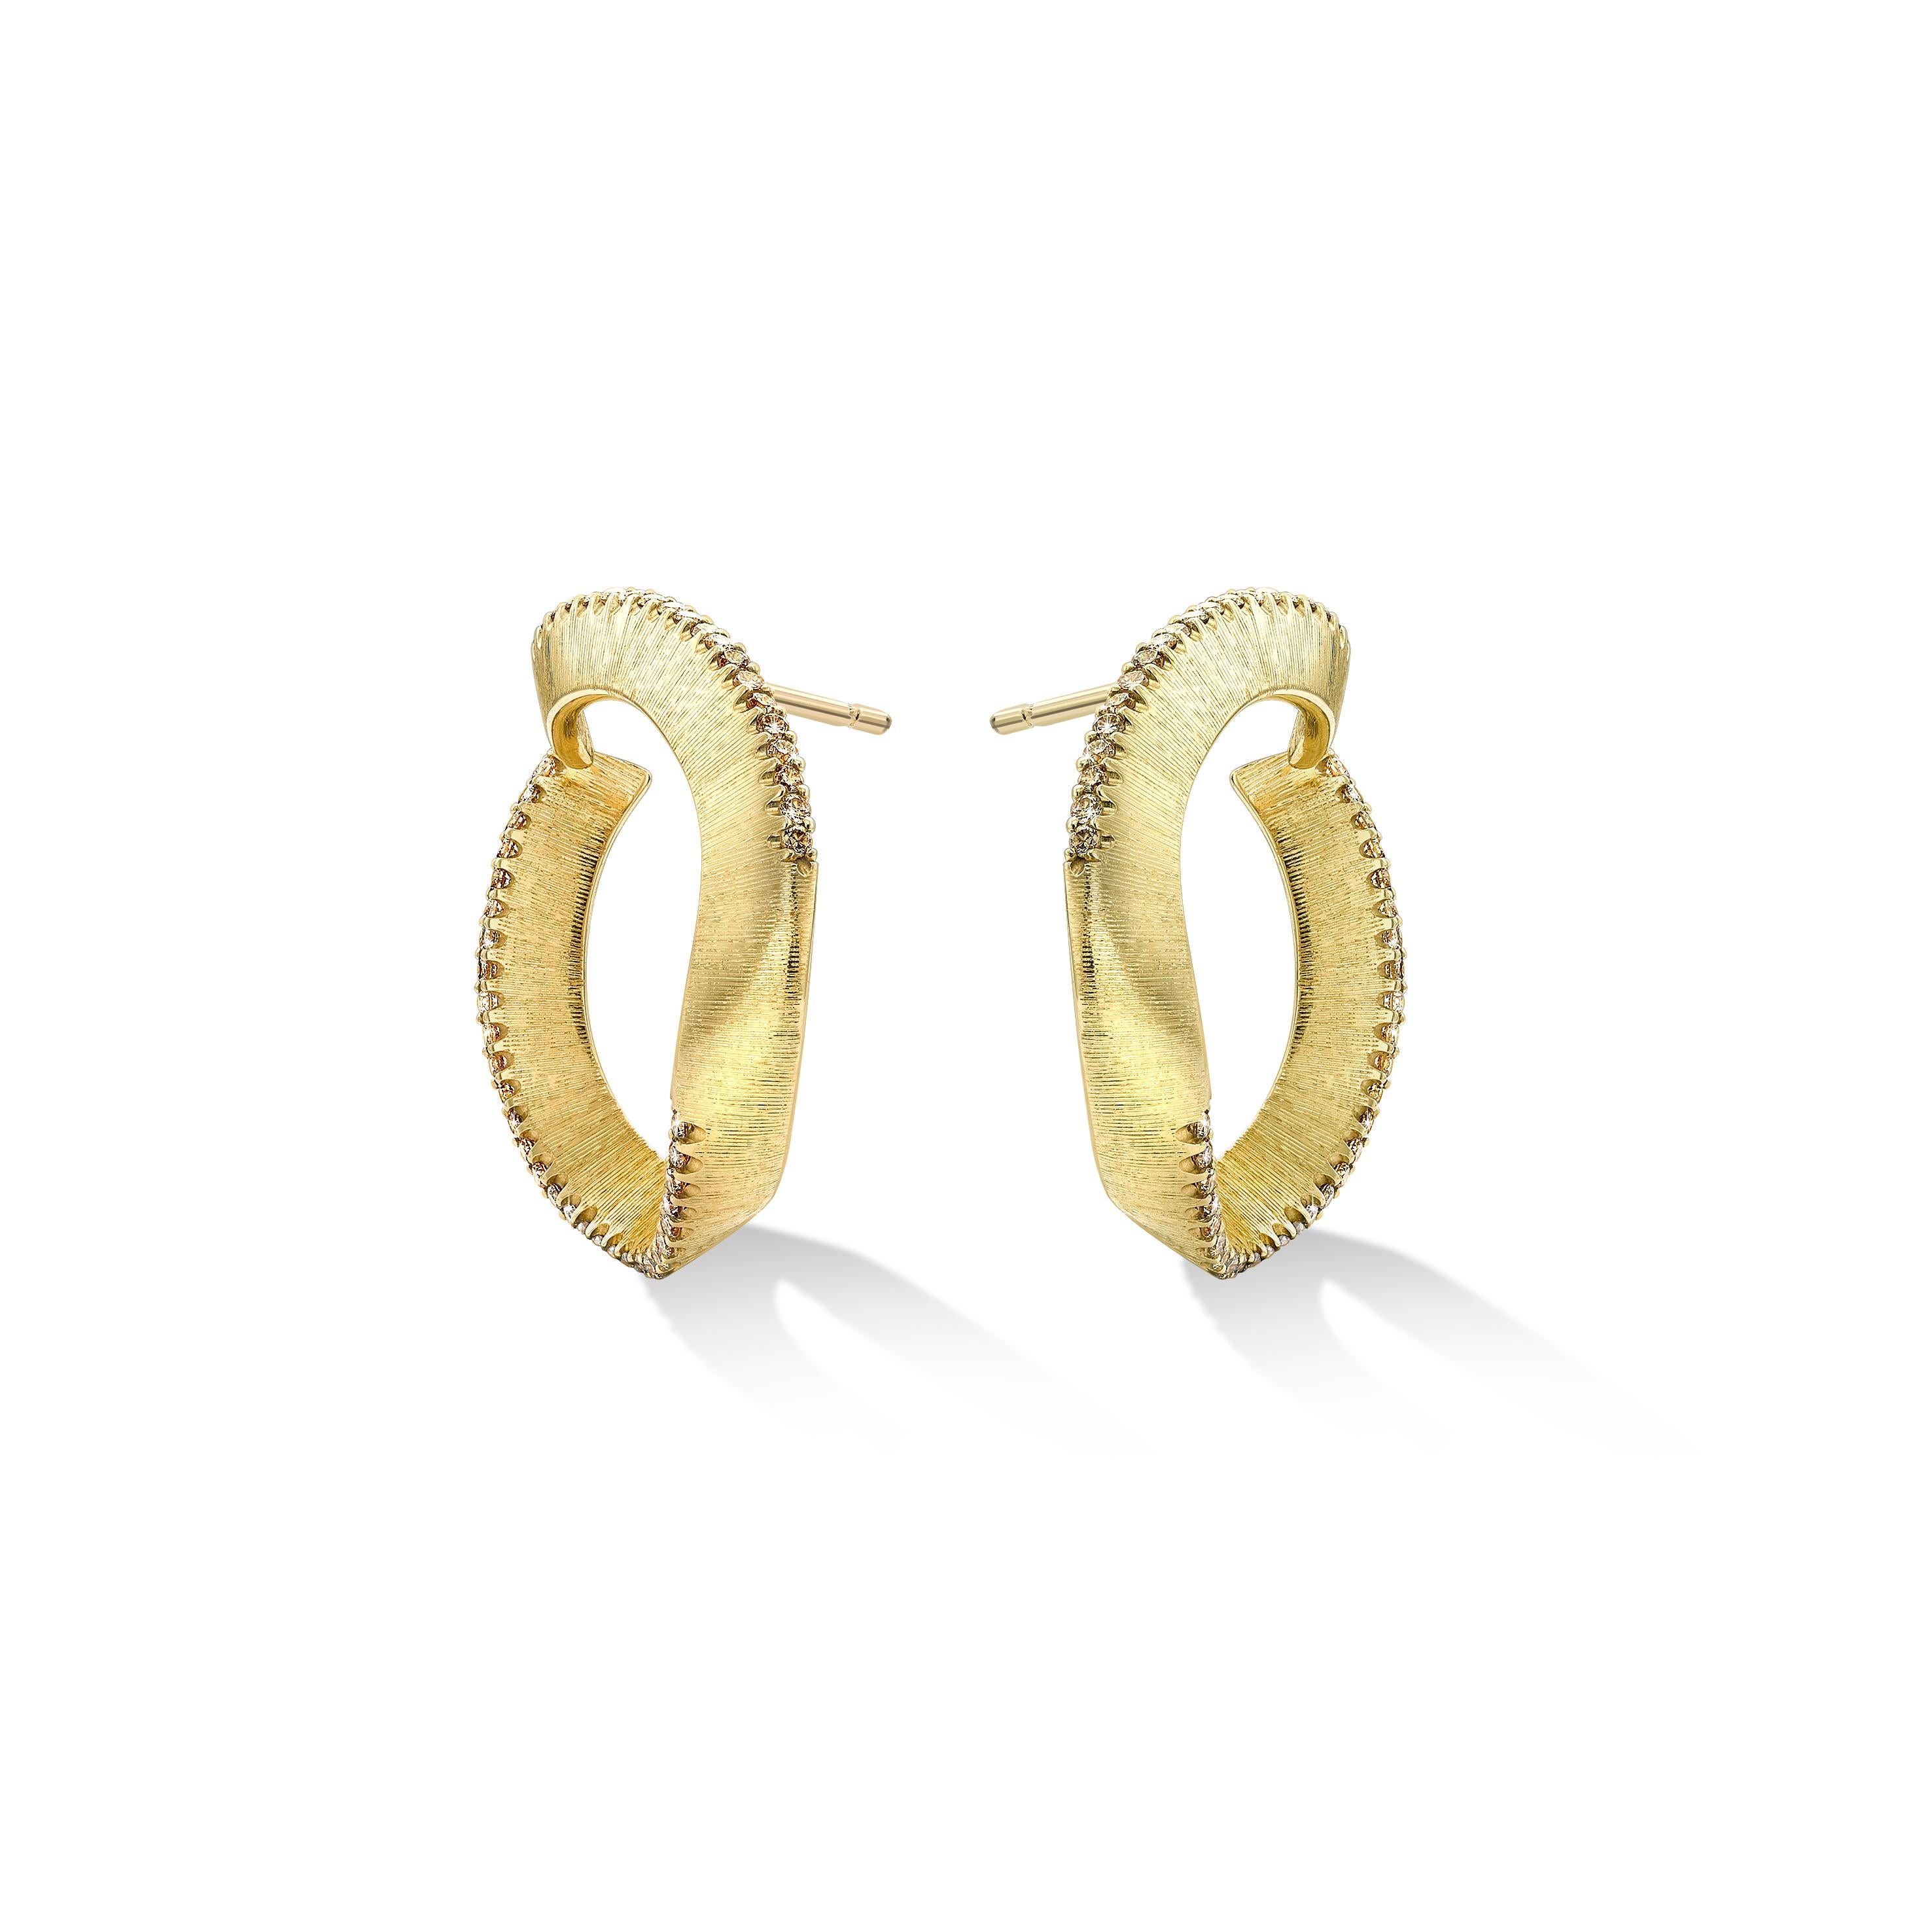 Liv Luttrell 
Twist Hoop Earrings 2020

Details 
18-karat yellow gold 
Silk engraving
Made in London 

This Edition of the Twist hoop earrings are available in the studio and can be dispatched within 2 working days from order. 


Customisation 

As